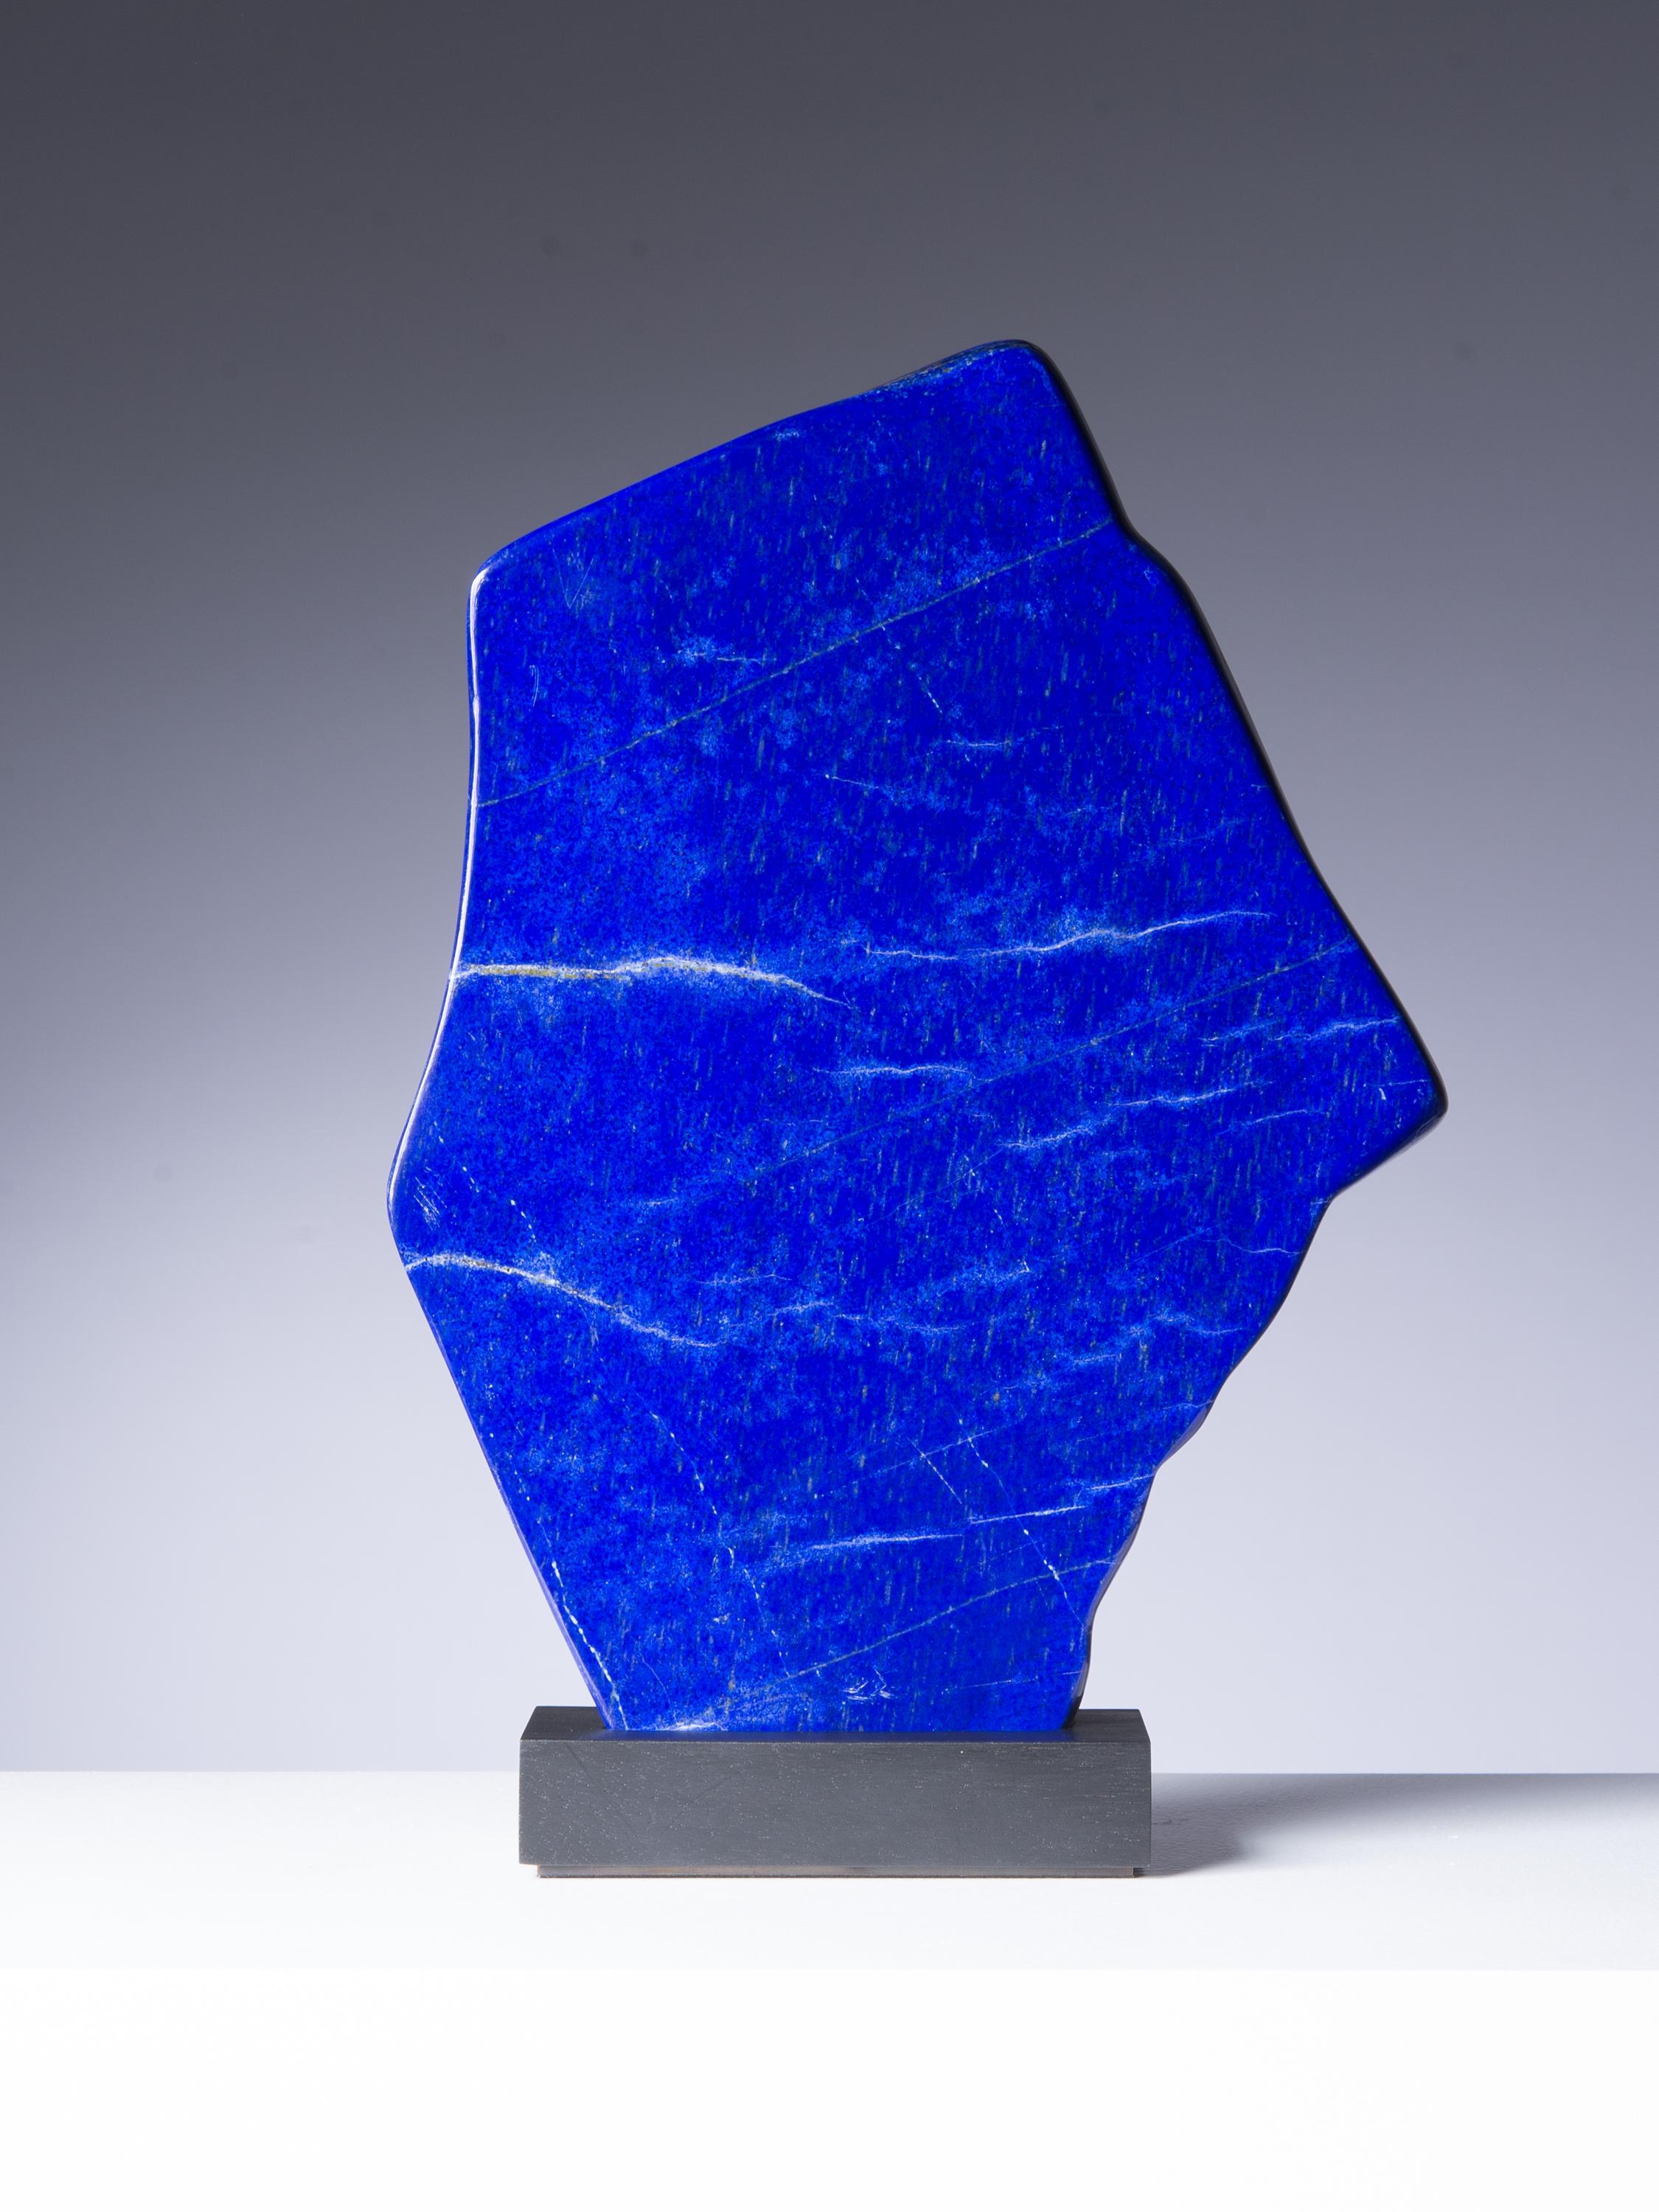 A delightful small section of vibrant lapis lazuli. Beautifully polished
freeform specimen.

This piece was legally and ethically sourced.
Place of origin: Afghanistan